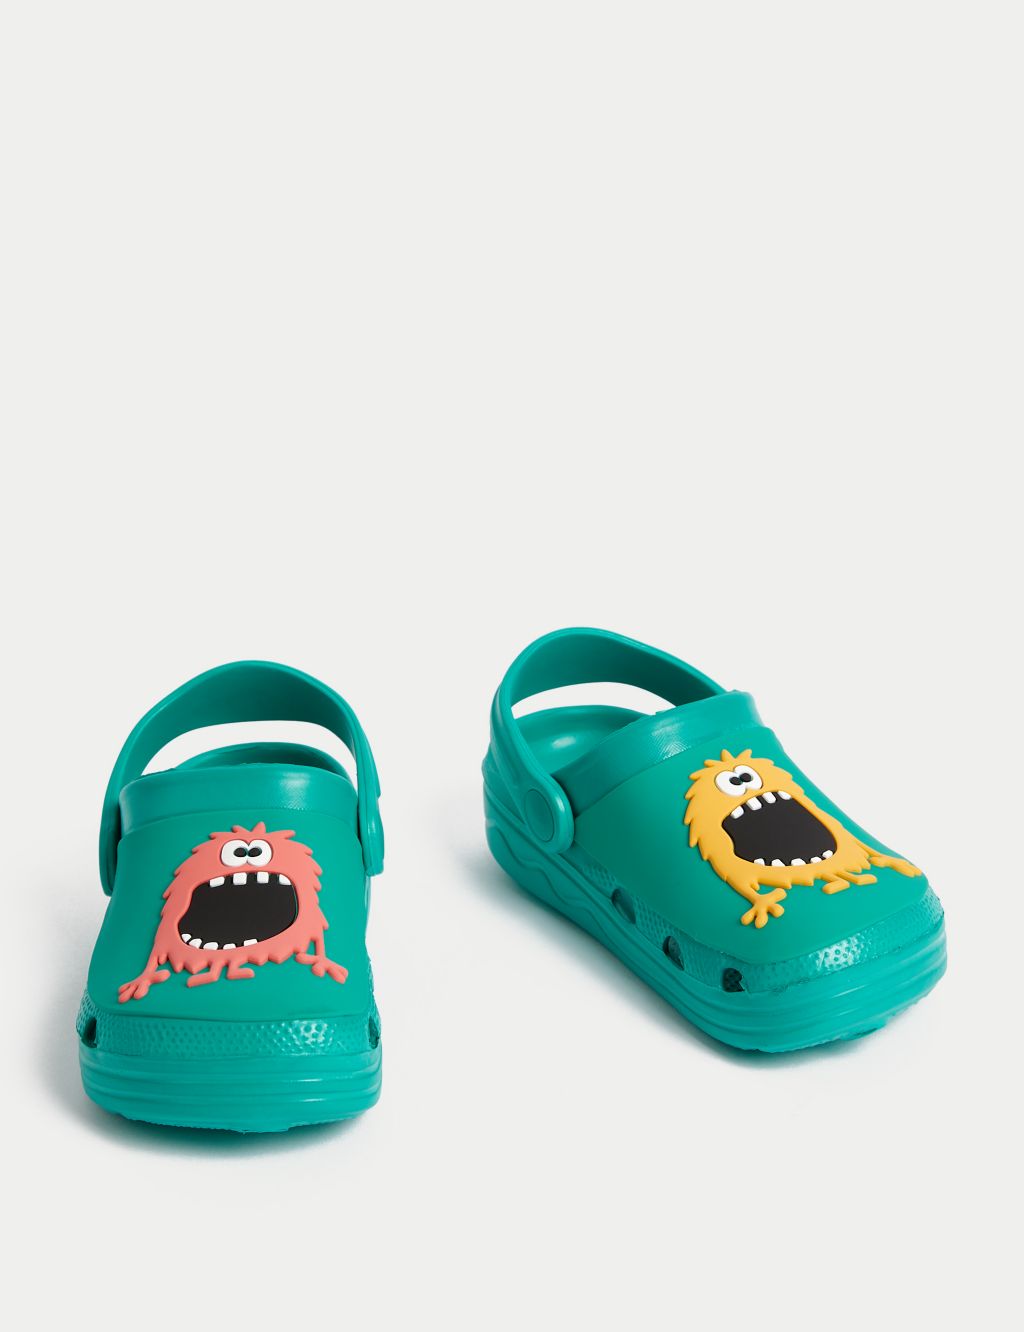 Kids' Monster Clogs (4 Small - 2 Large) image 2